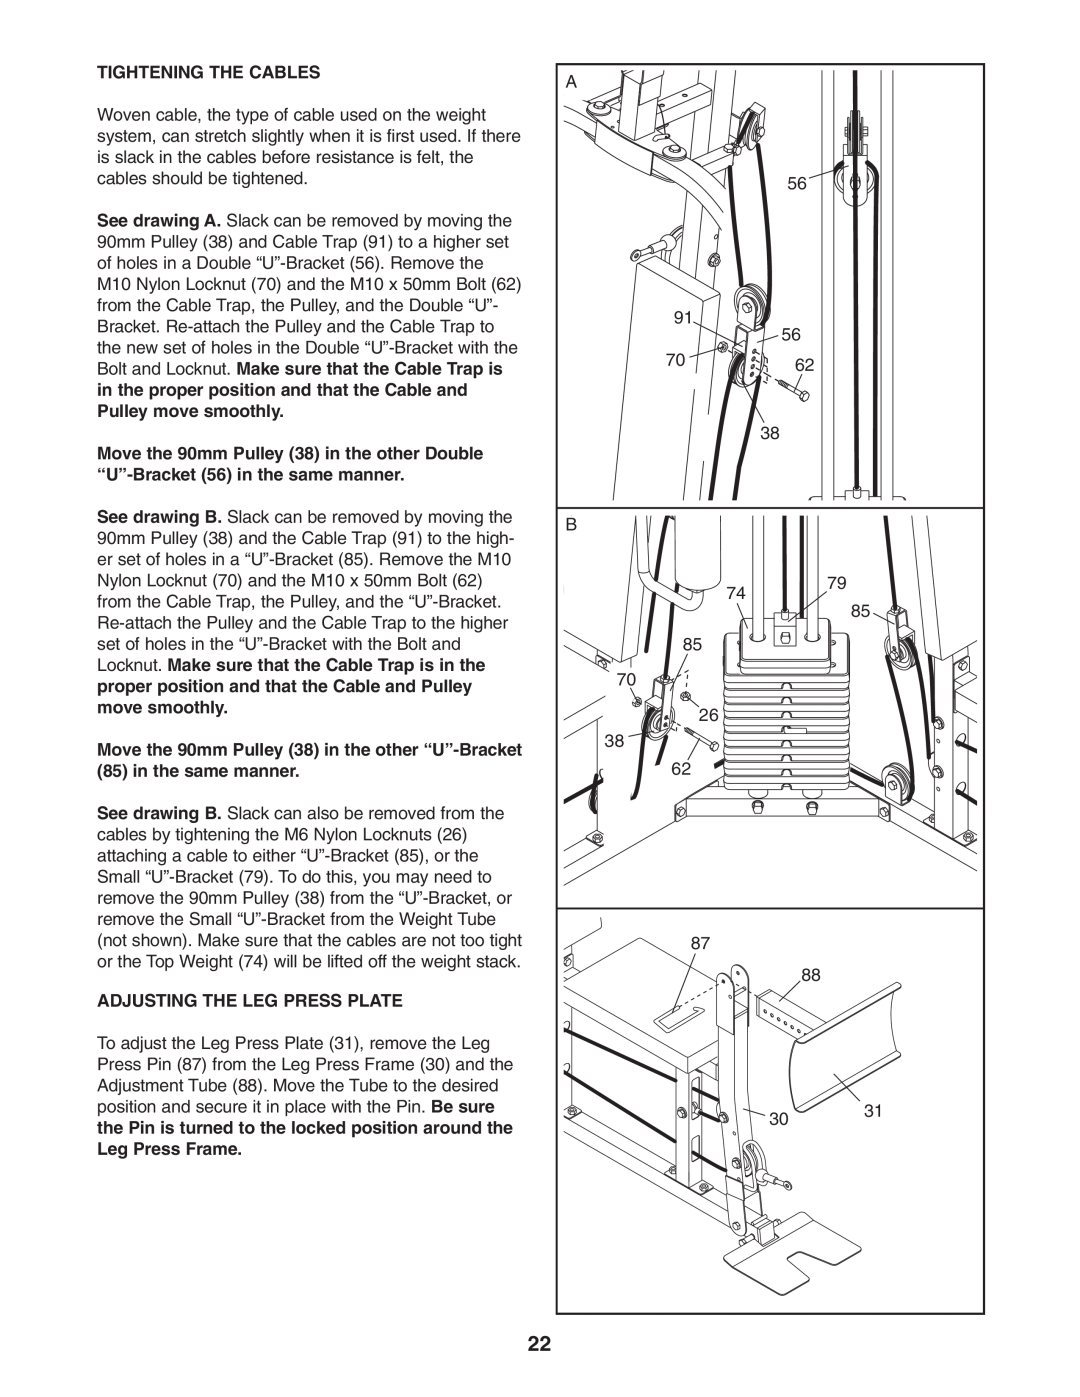 Weider 831.159822 user manual Tightening The Cables, Adjusting The Leg Press Plate 